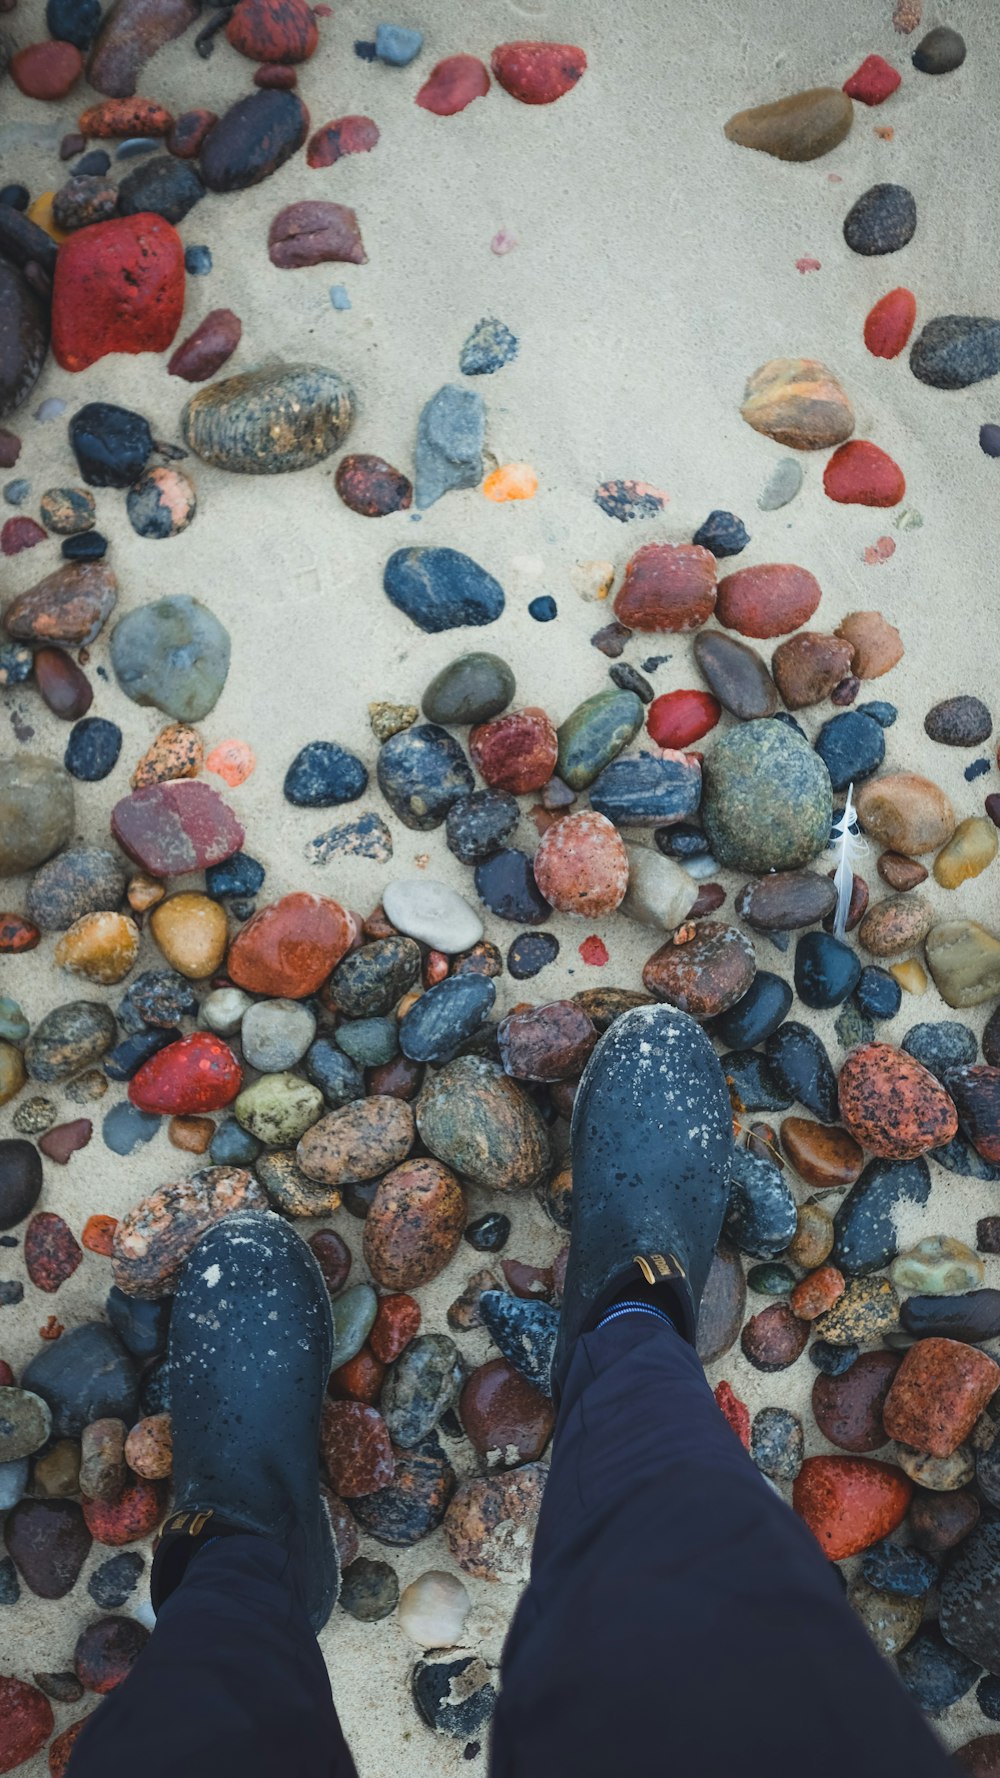 a person's feet on a rocky surface